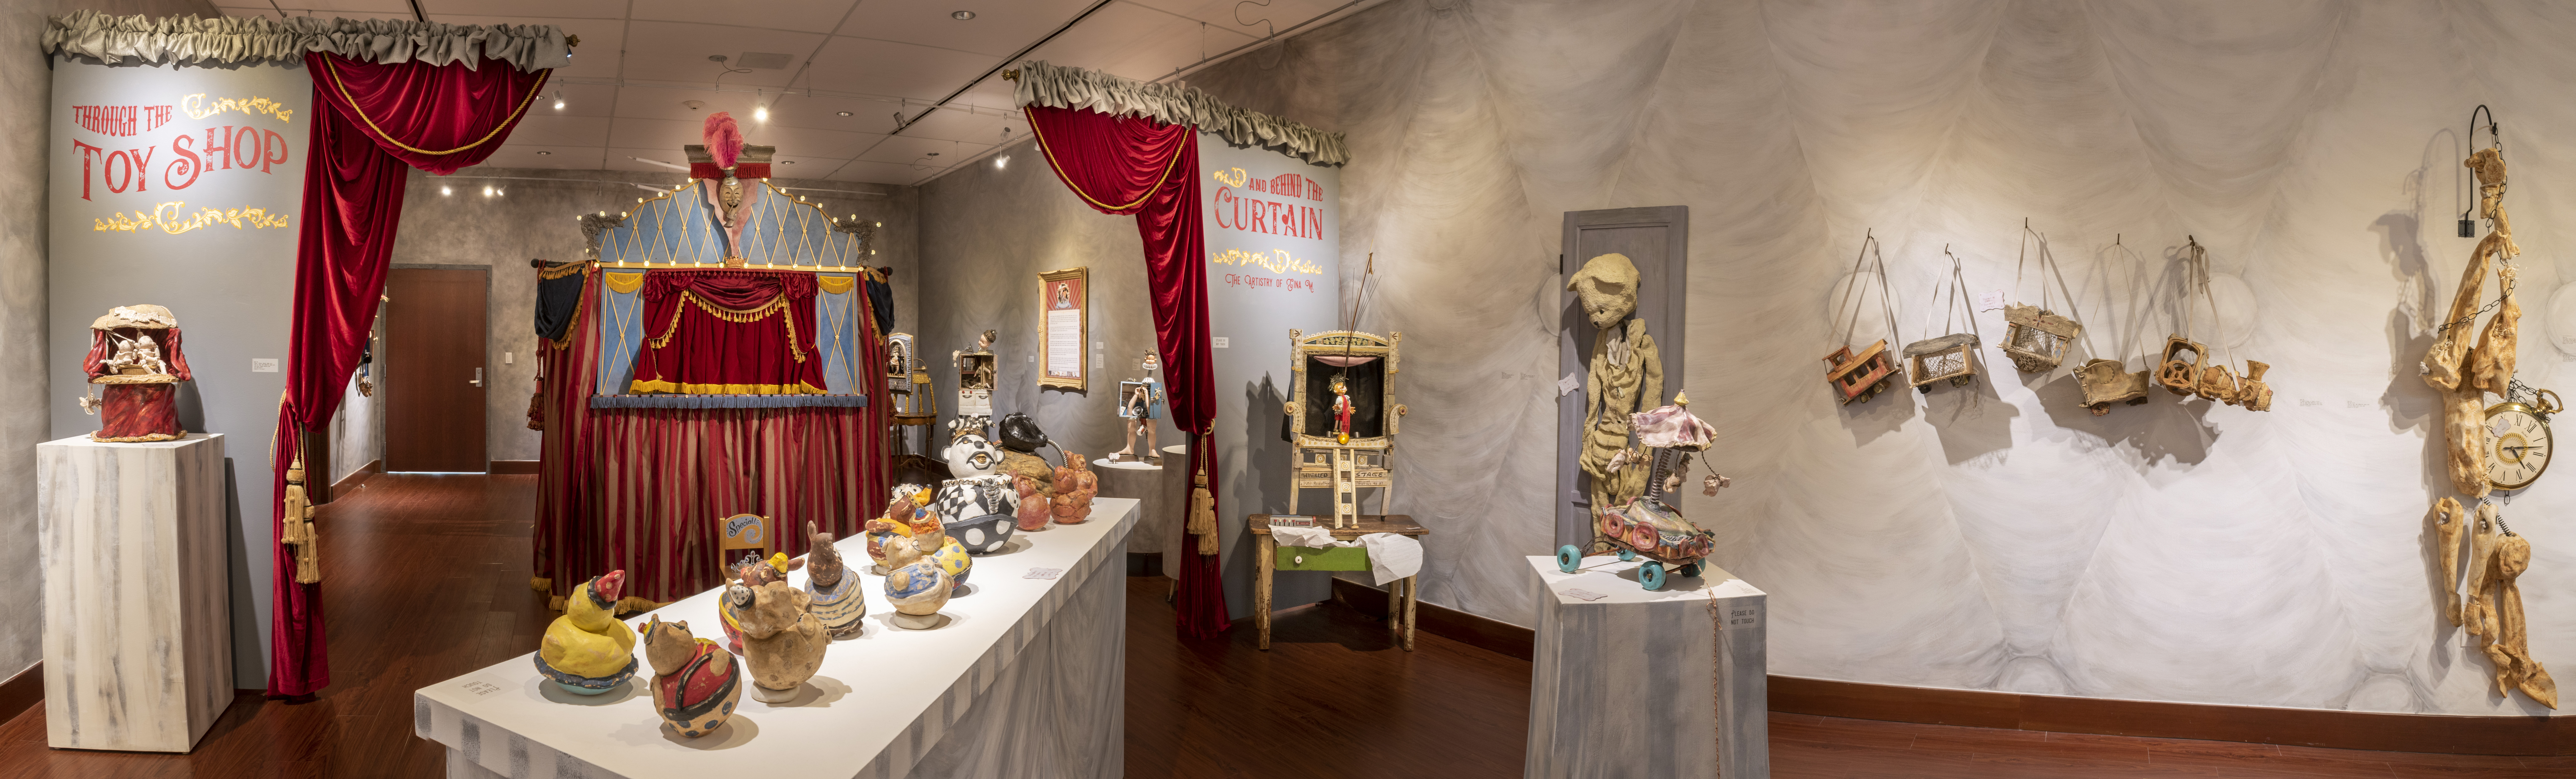 Installation Pano View, Front of Gallery, Through the Toy Shop and Behind the Curtain: The Artistry of Gina M. Exhibition. 